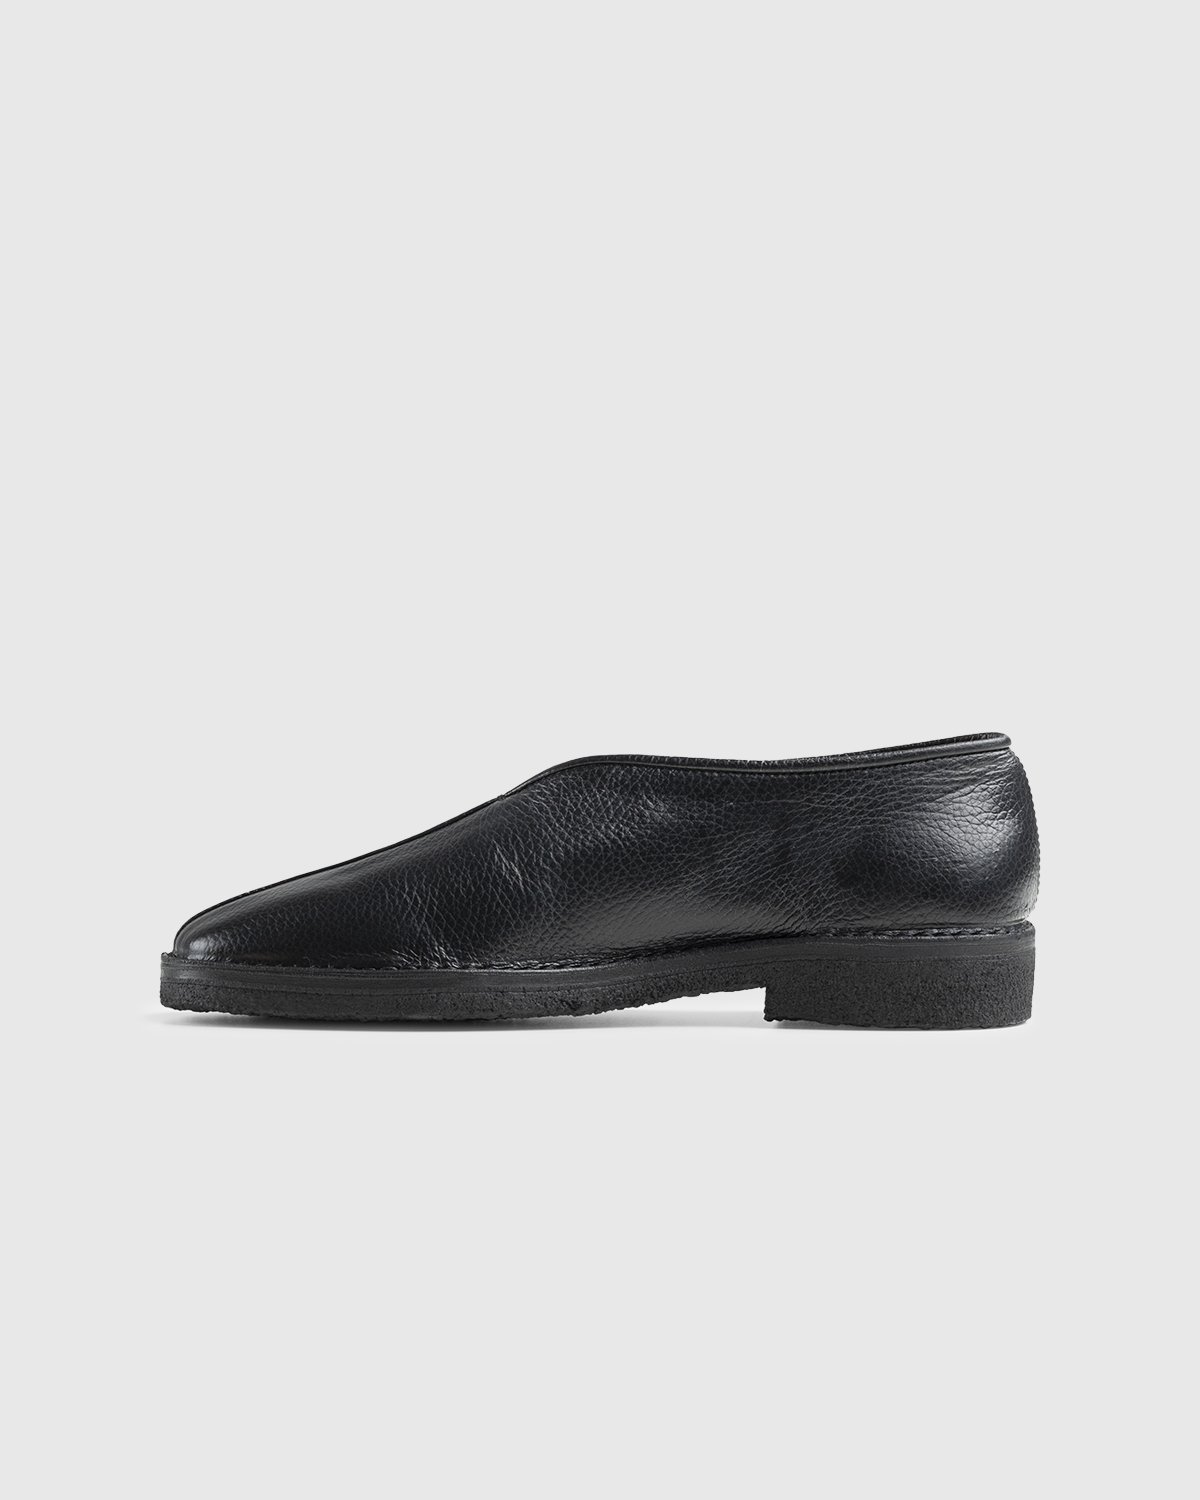 Lemaire - Leather Chinese Slippers Black - Footwear - Black - Image 2